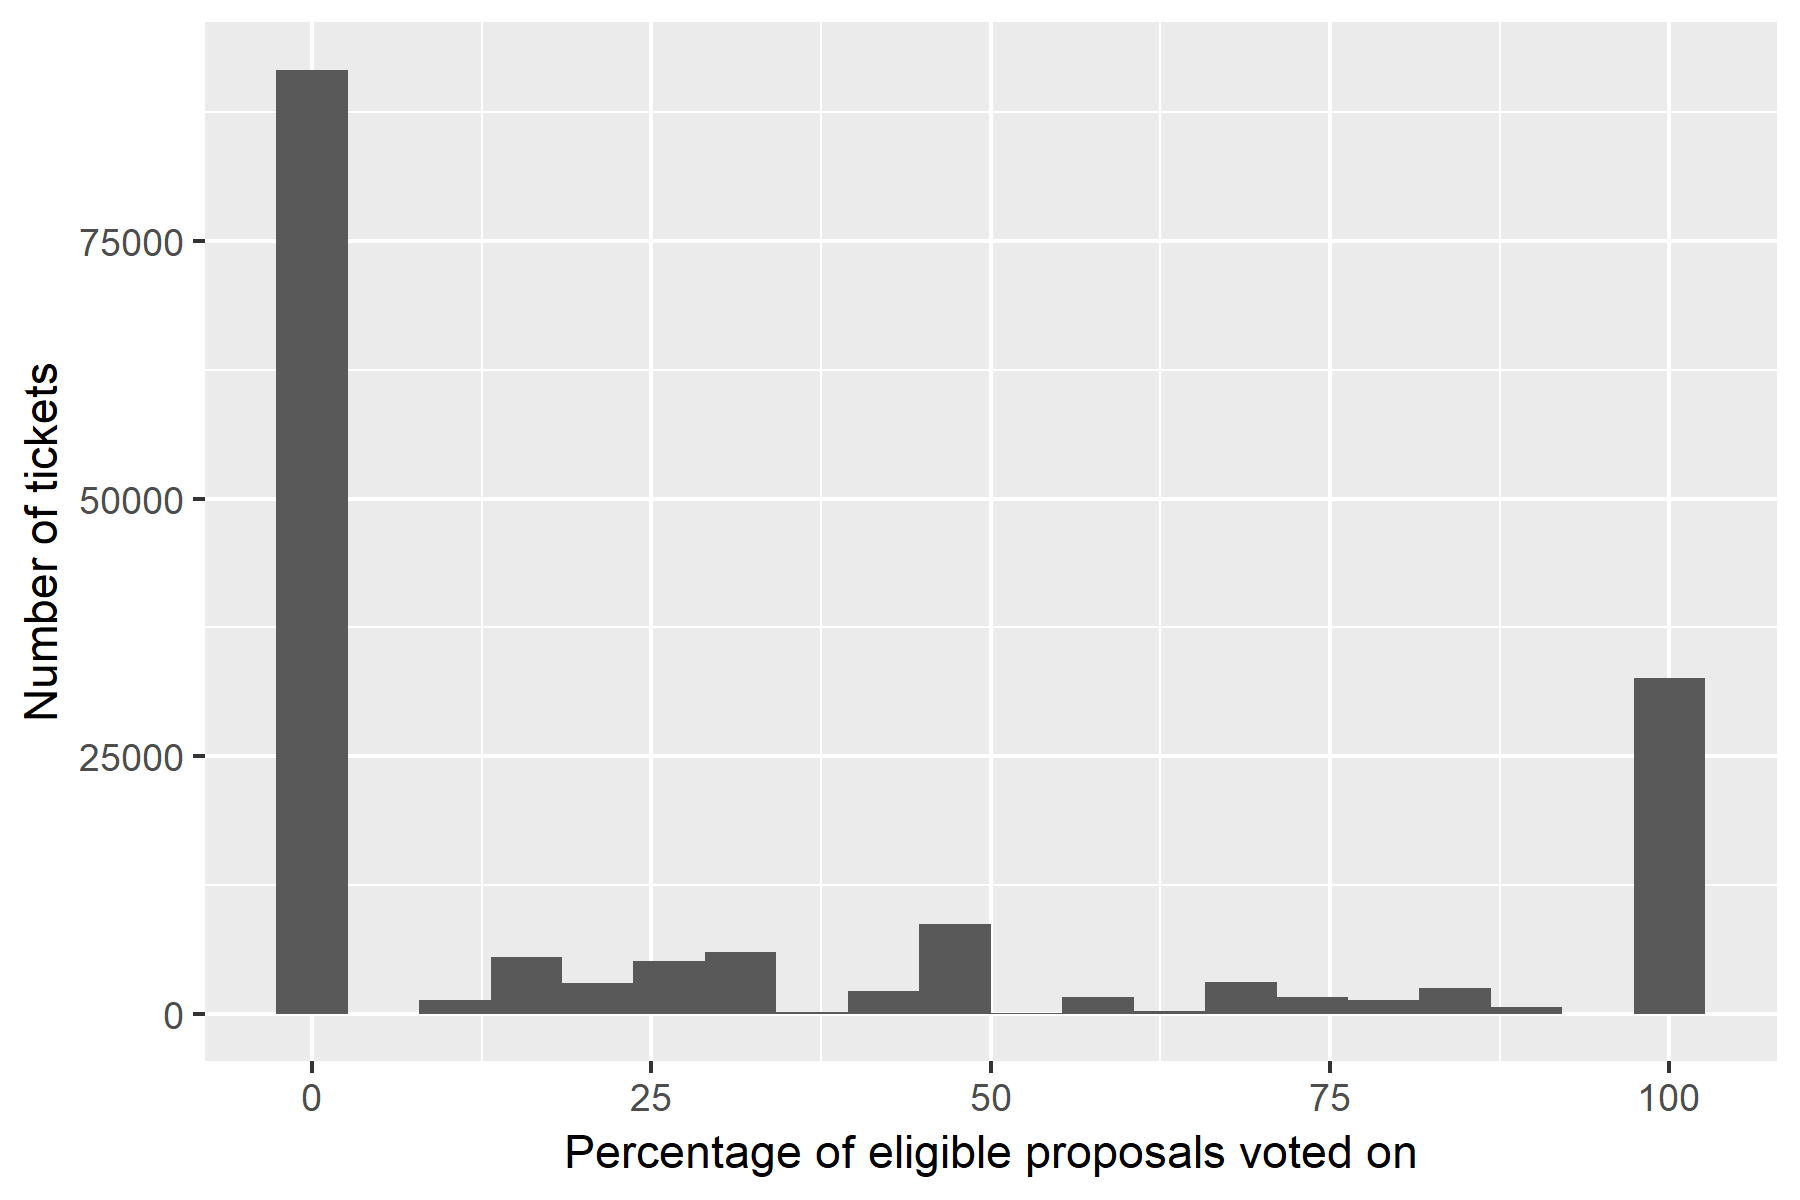 Ticket voting on eligible proposals